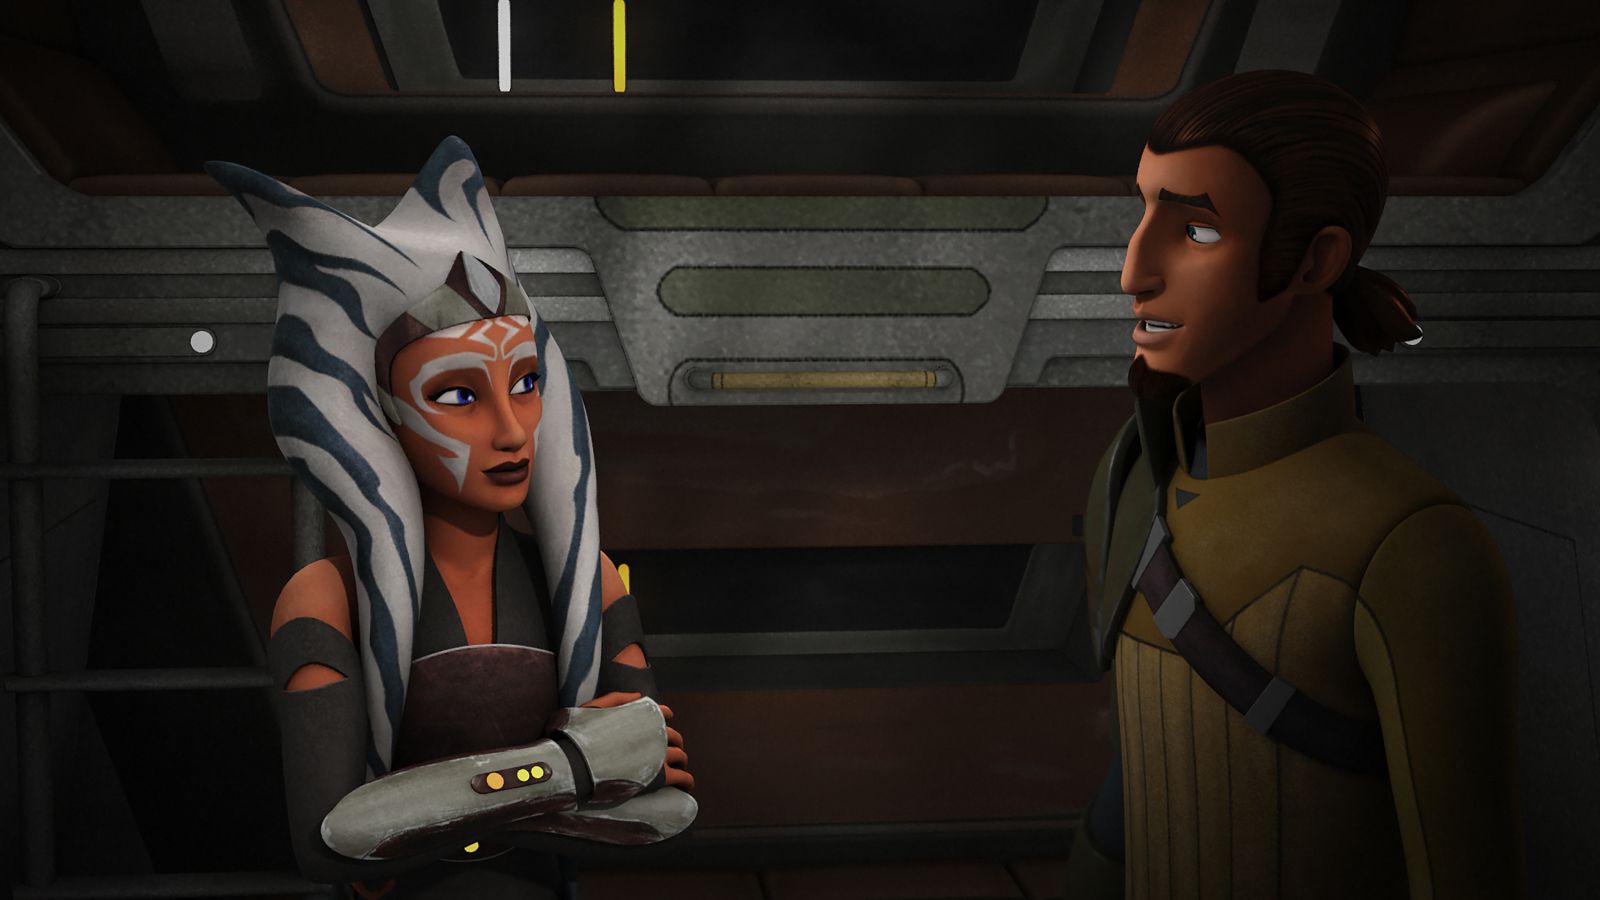 Clone Wars: New trailer includes appearance from a Rebels Kanan Jarrus